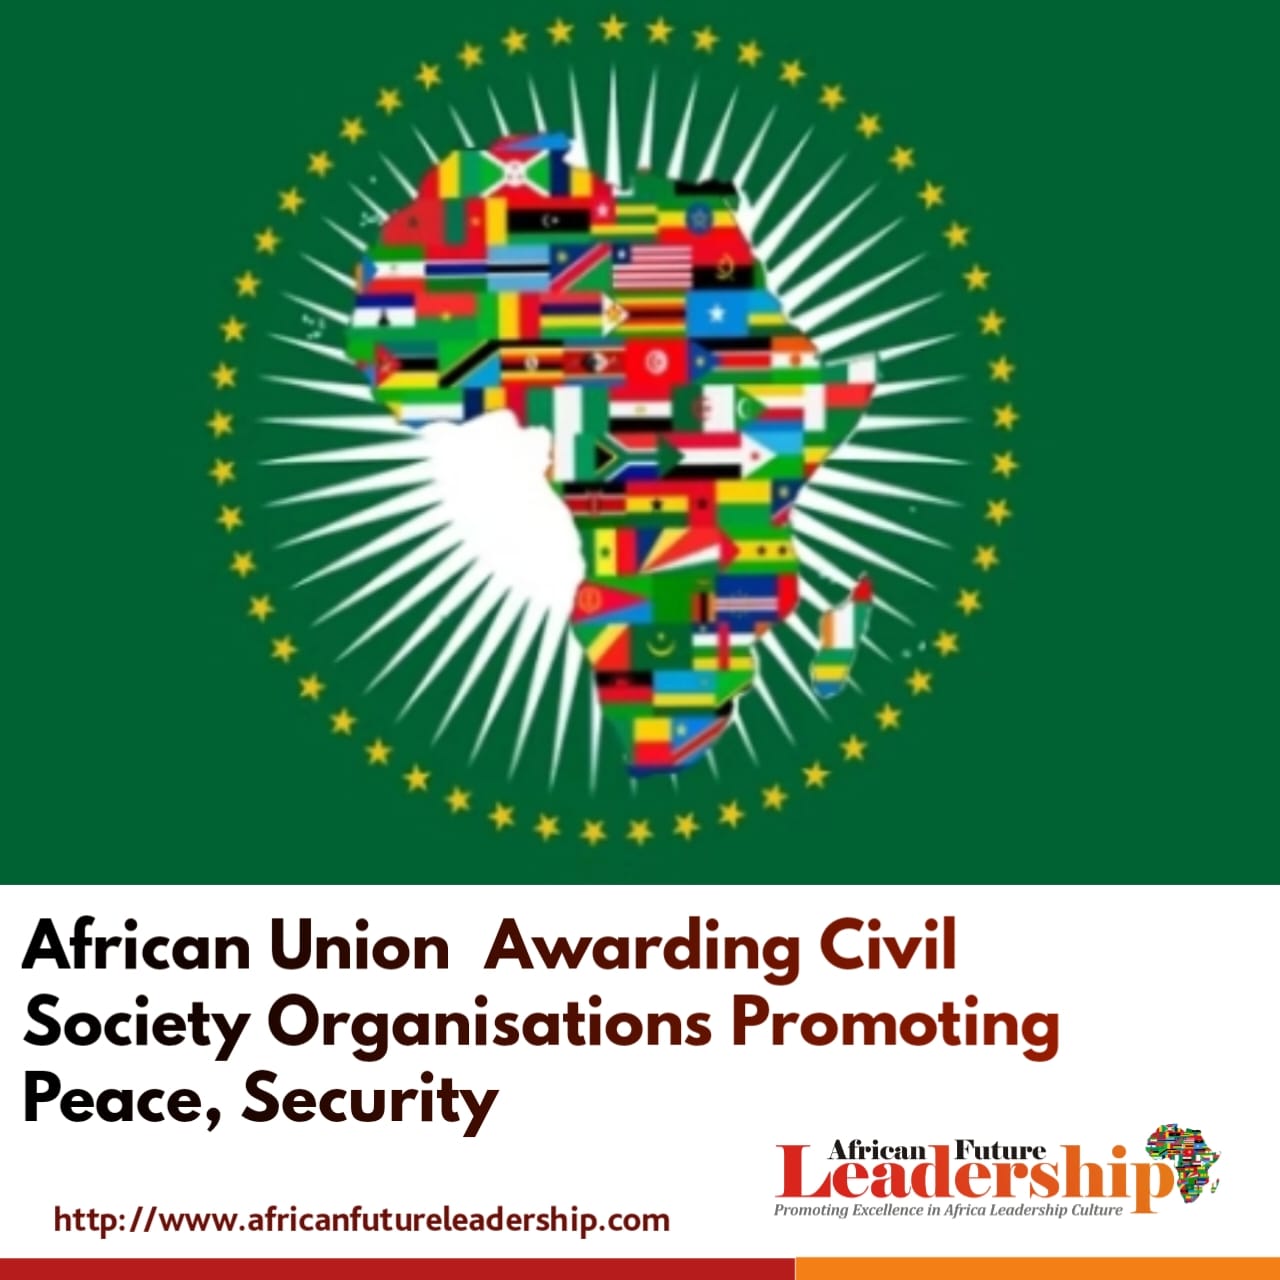 African Union Awarding Civil Society Organisations Promoting Peace, Security